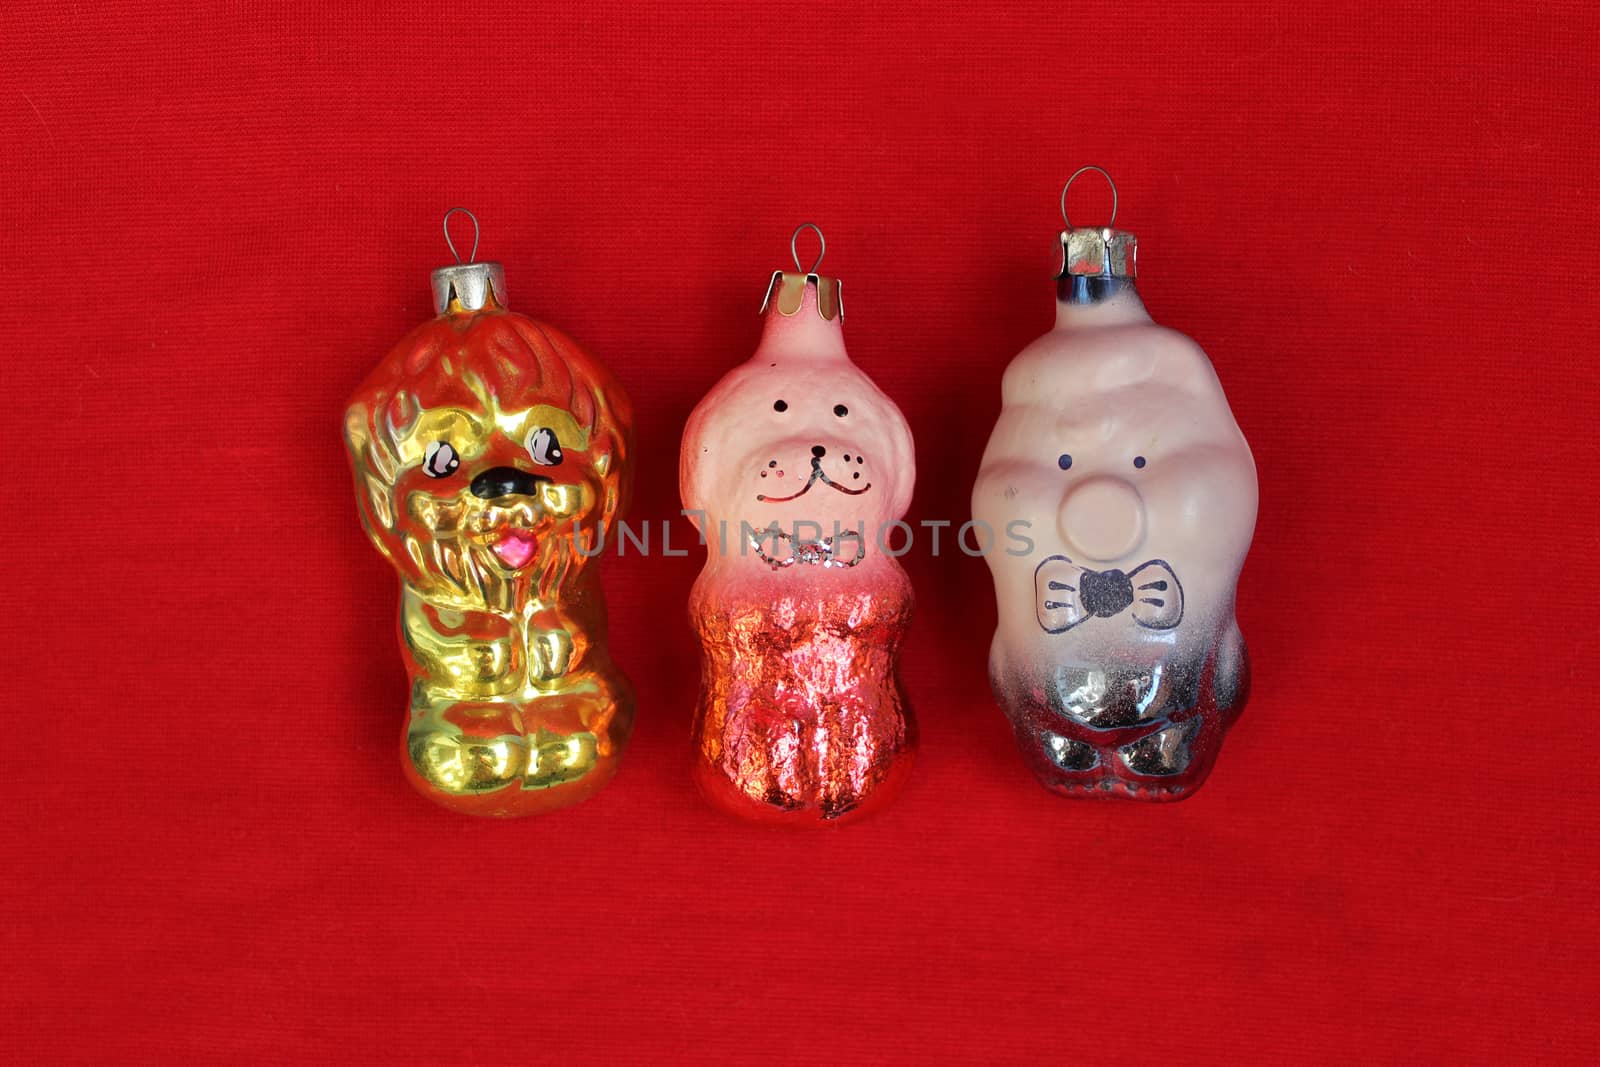 antique Christmas decorations on a red background for decoration Christmas tree